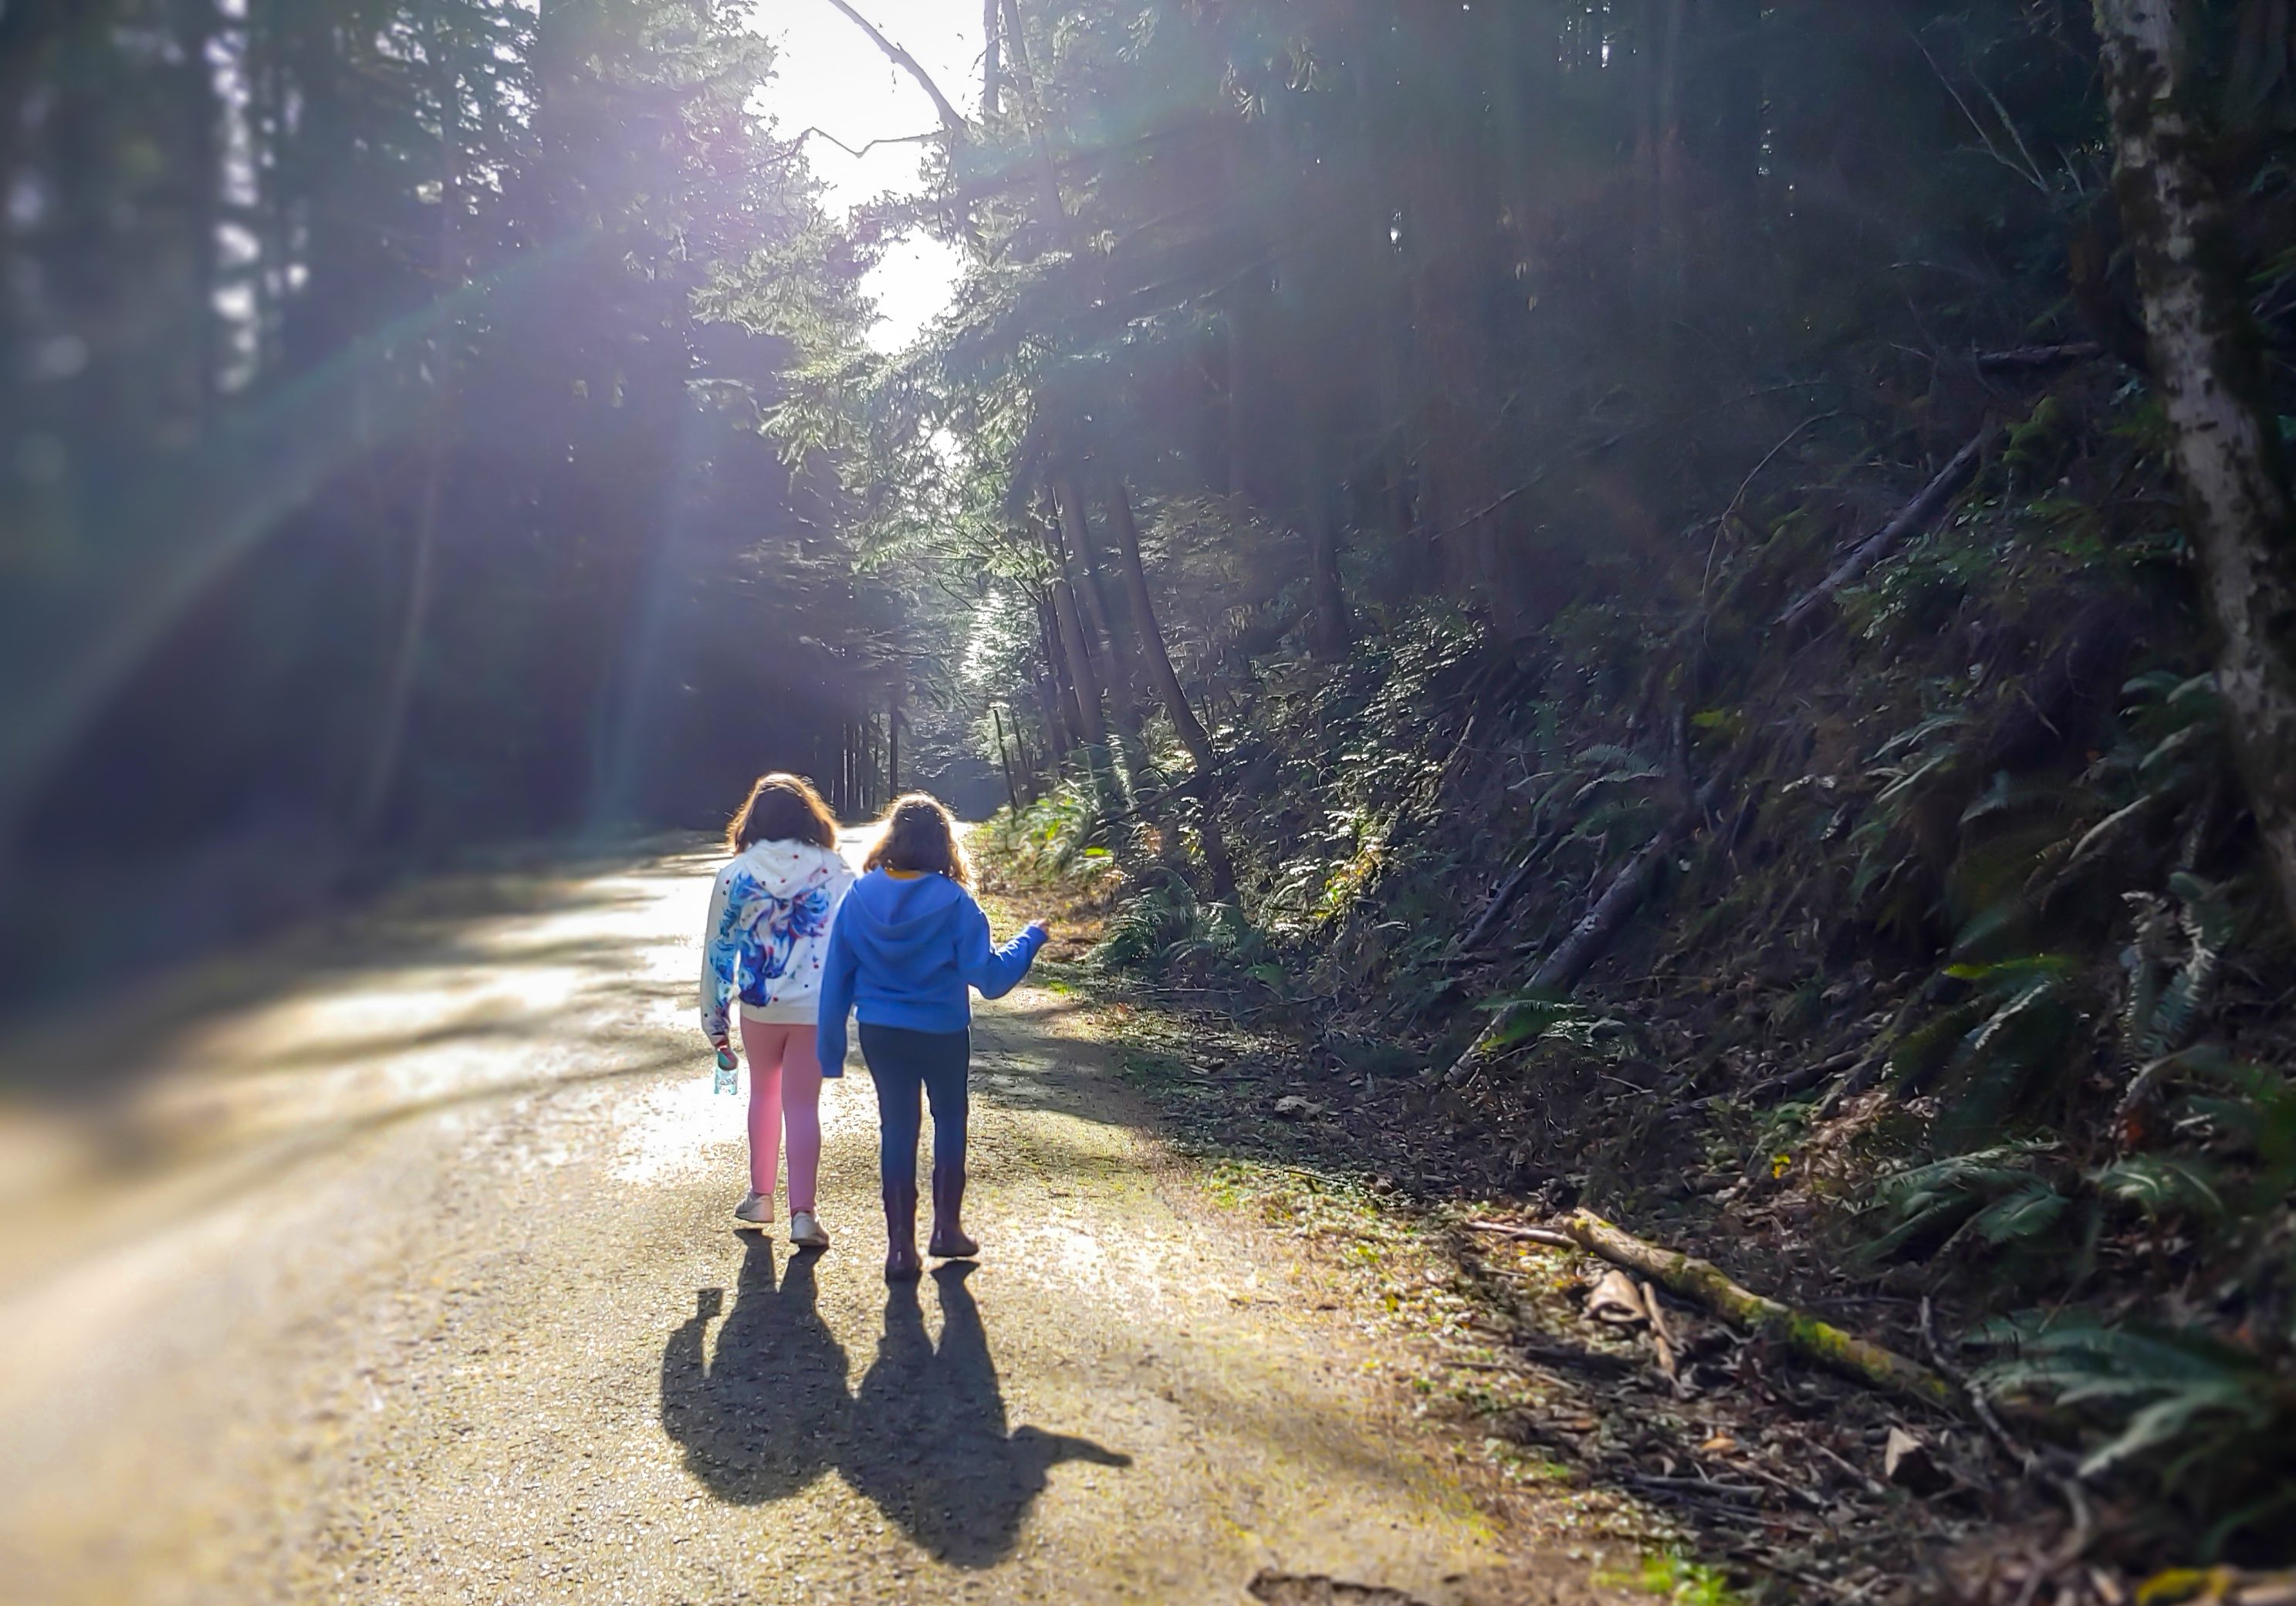 Two kids walking on a forested road.